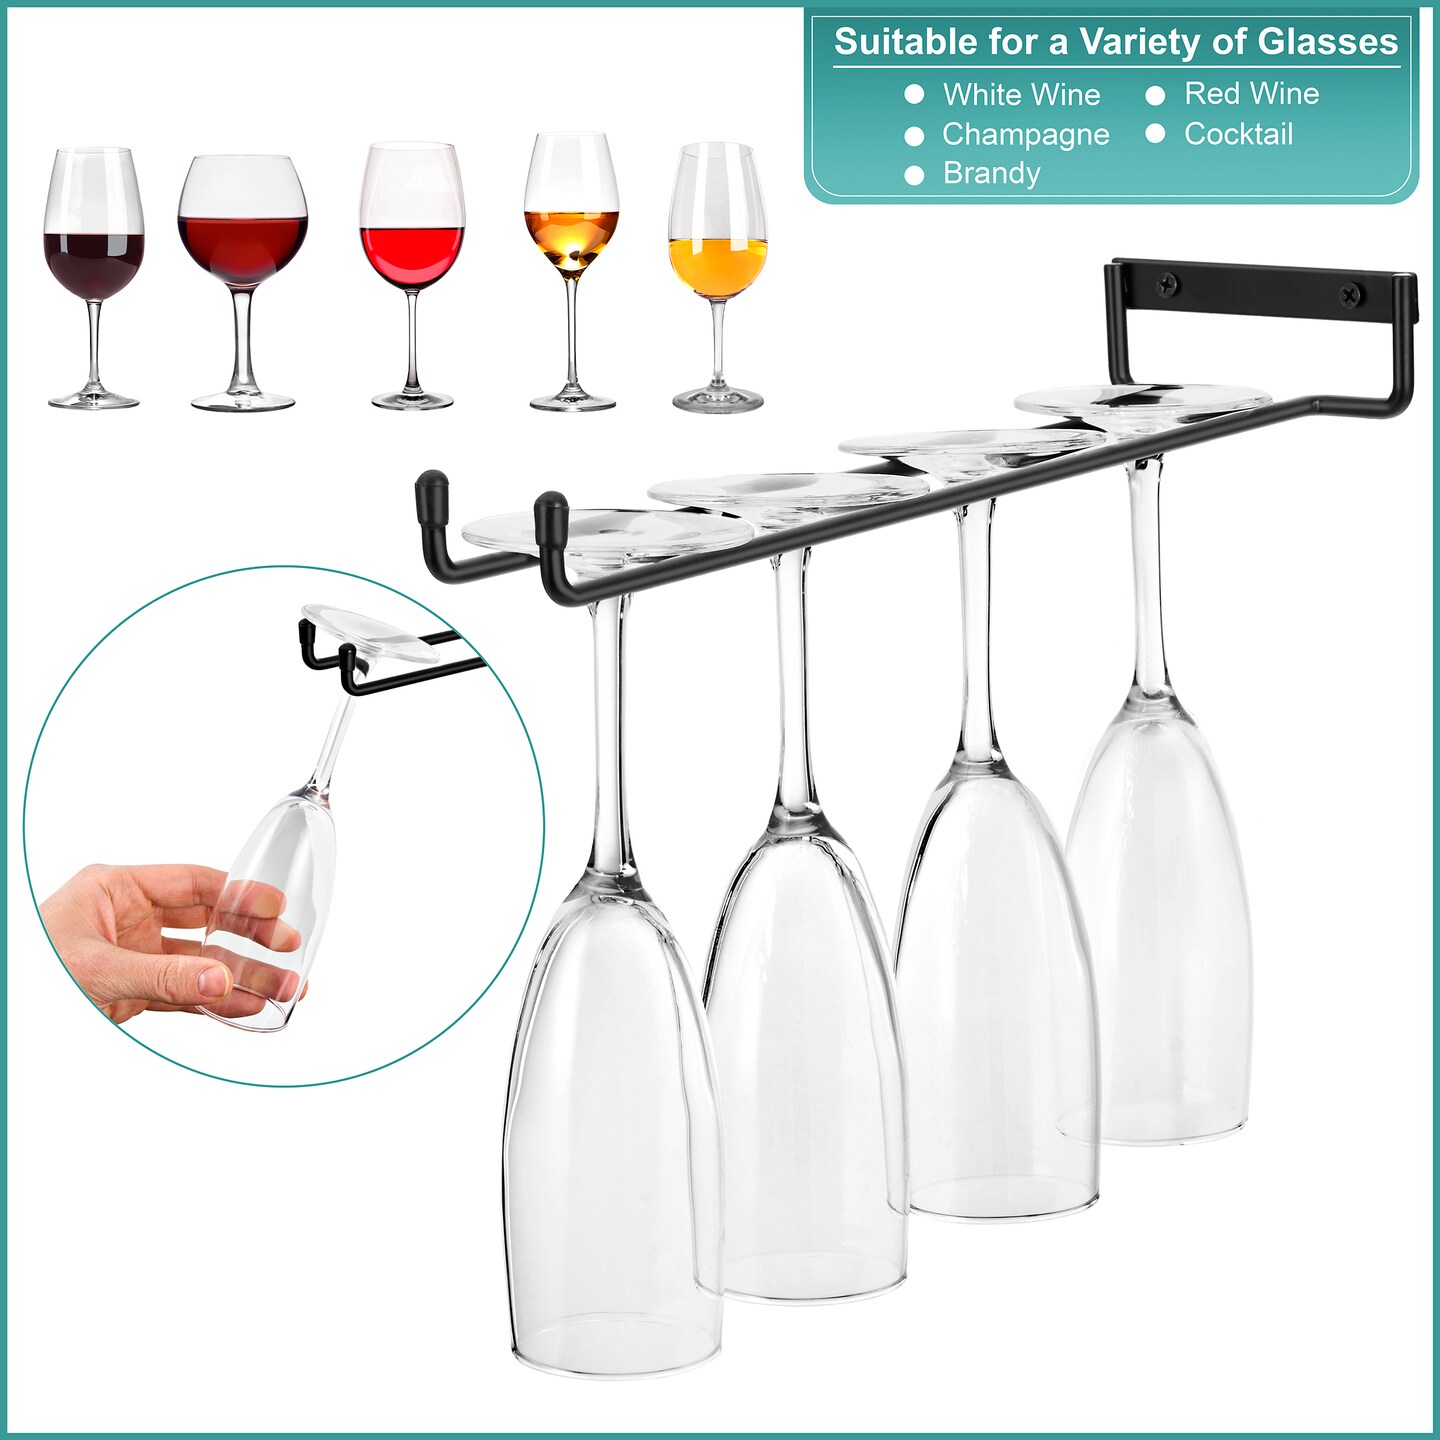 Sorbus 12 Inch Wall Mounted Under Cabinet Wine Glass Holder - for Organization and Storage - Holds Up to 4 Stemware Wine Glasses Each, 8 Total (2 Pack)